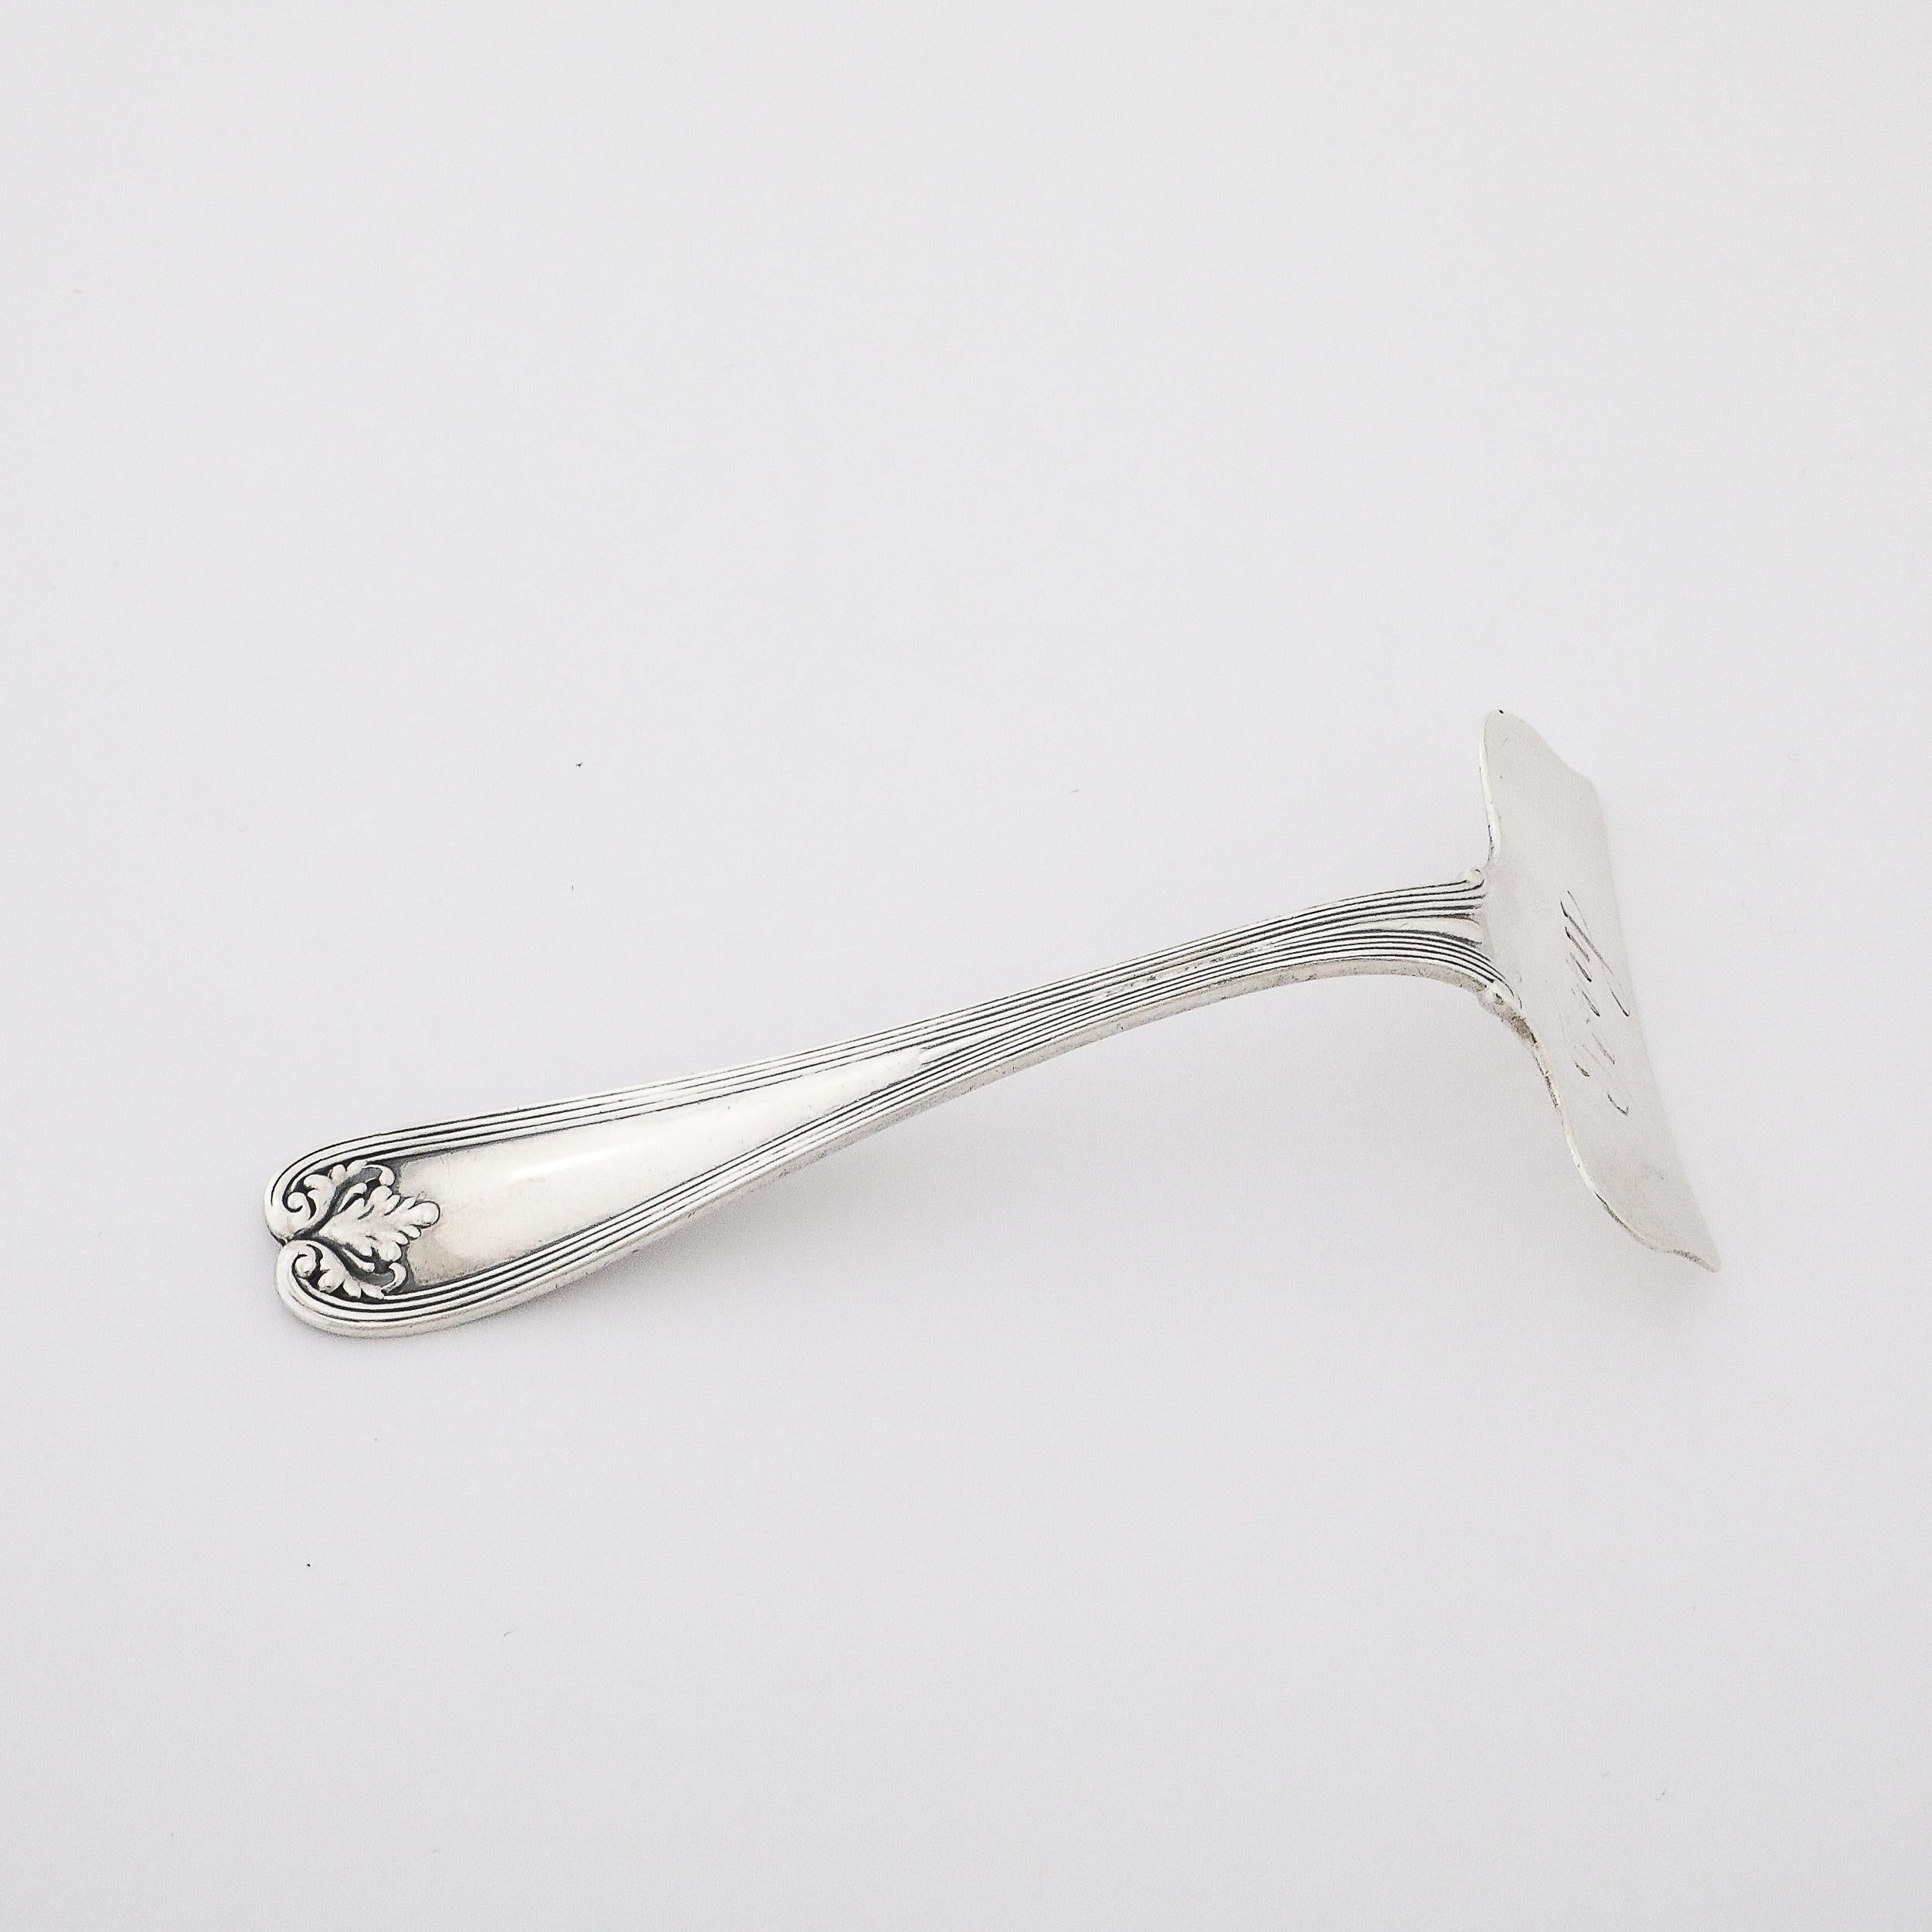 Tiffany and Co. 19th Century Sterling Silver Food Pusher in Pattern IX95 T 4